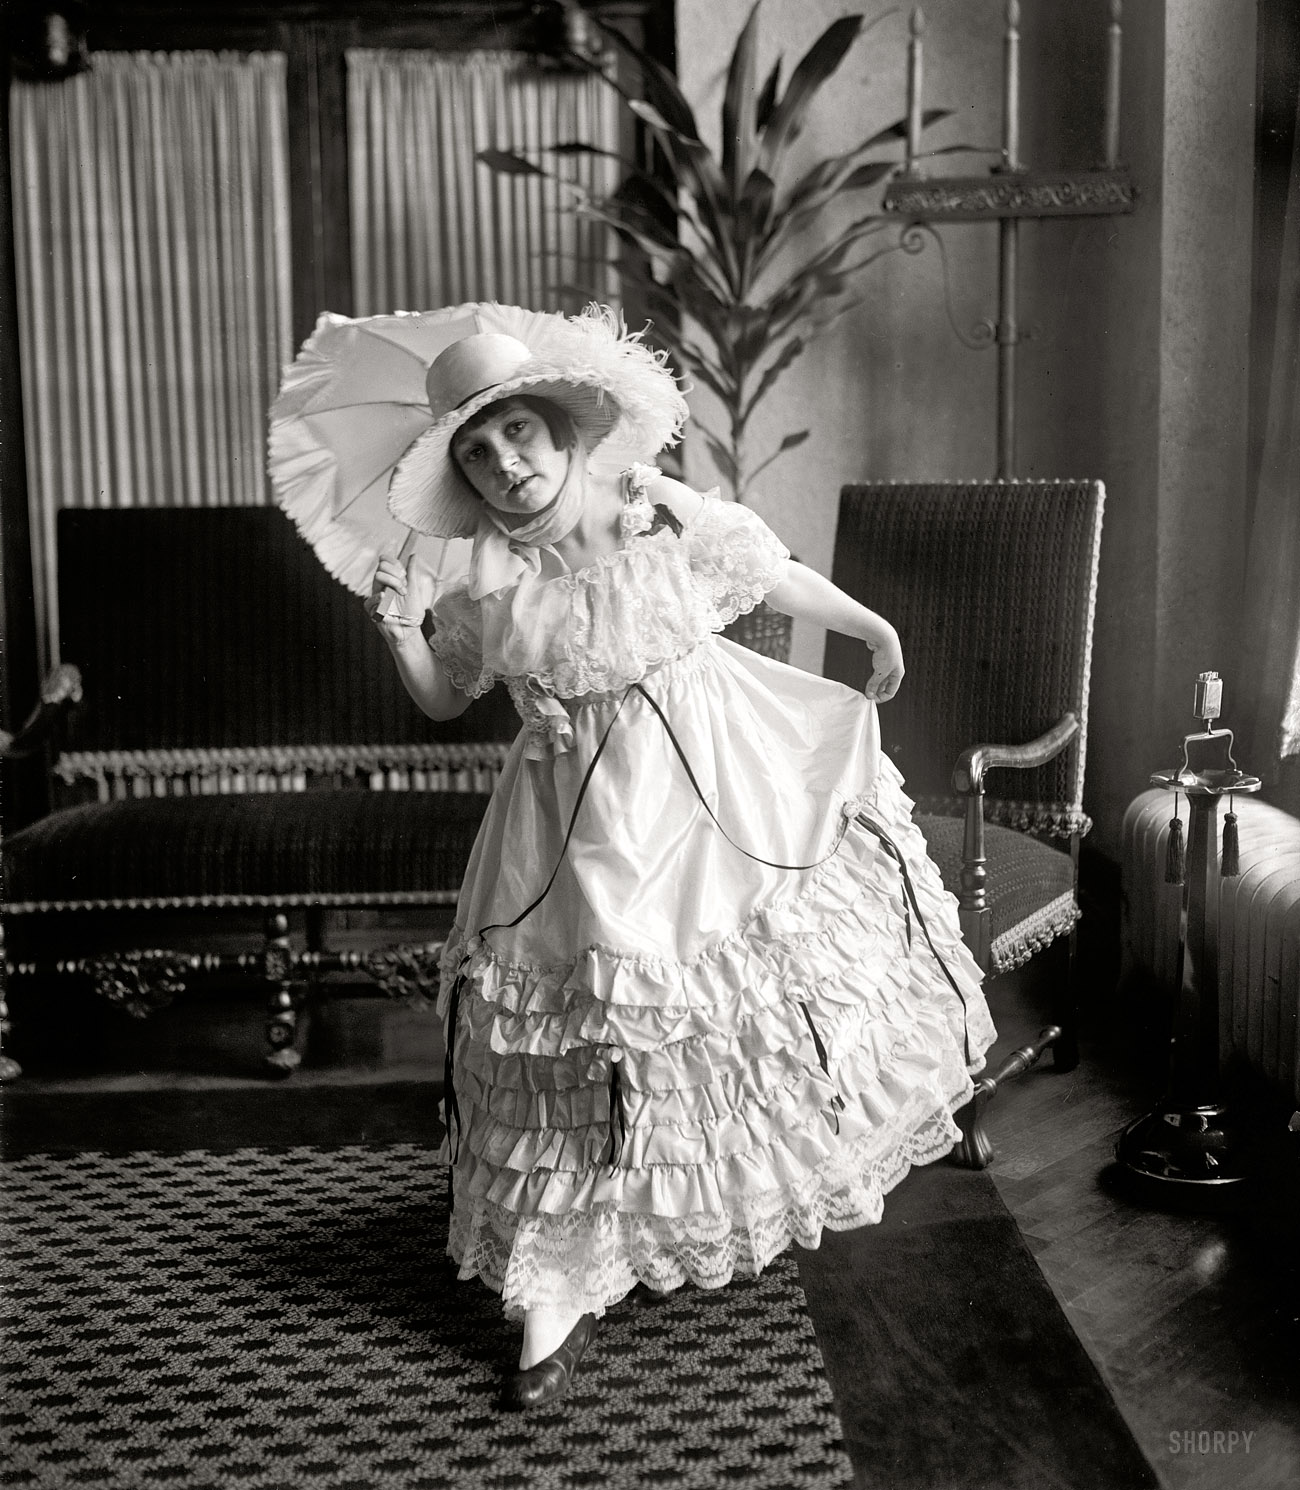 Next up in the Shorpy Sunday Night Cavalcade of Enigmatic Portraits Dated Dec. 12, 1925: "Miss Margaret Van Horn." National Photo Company. View full size.